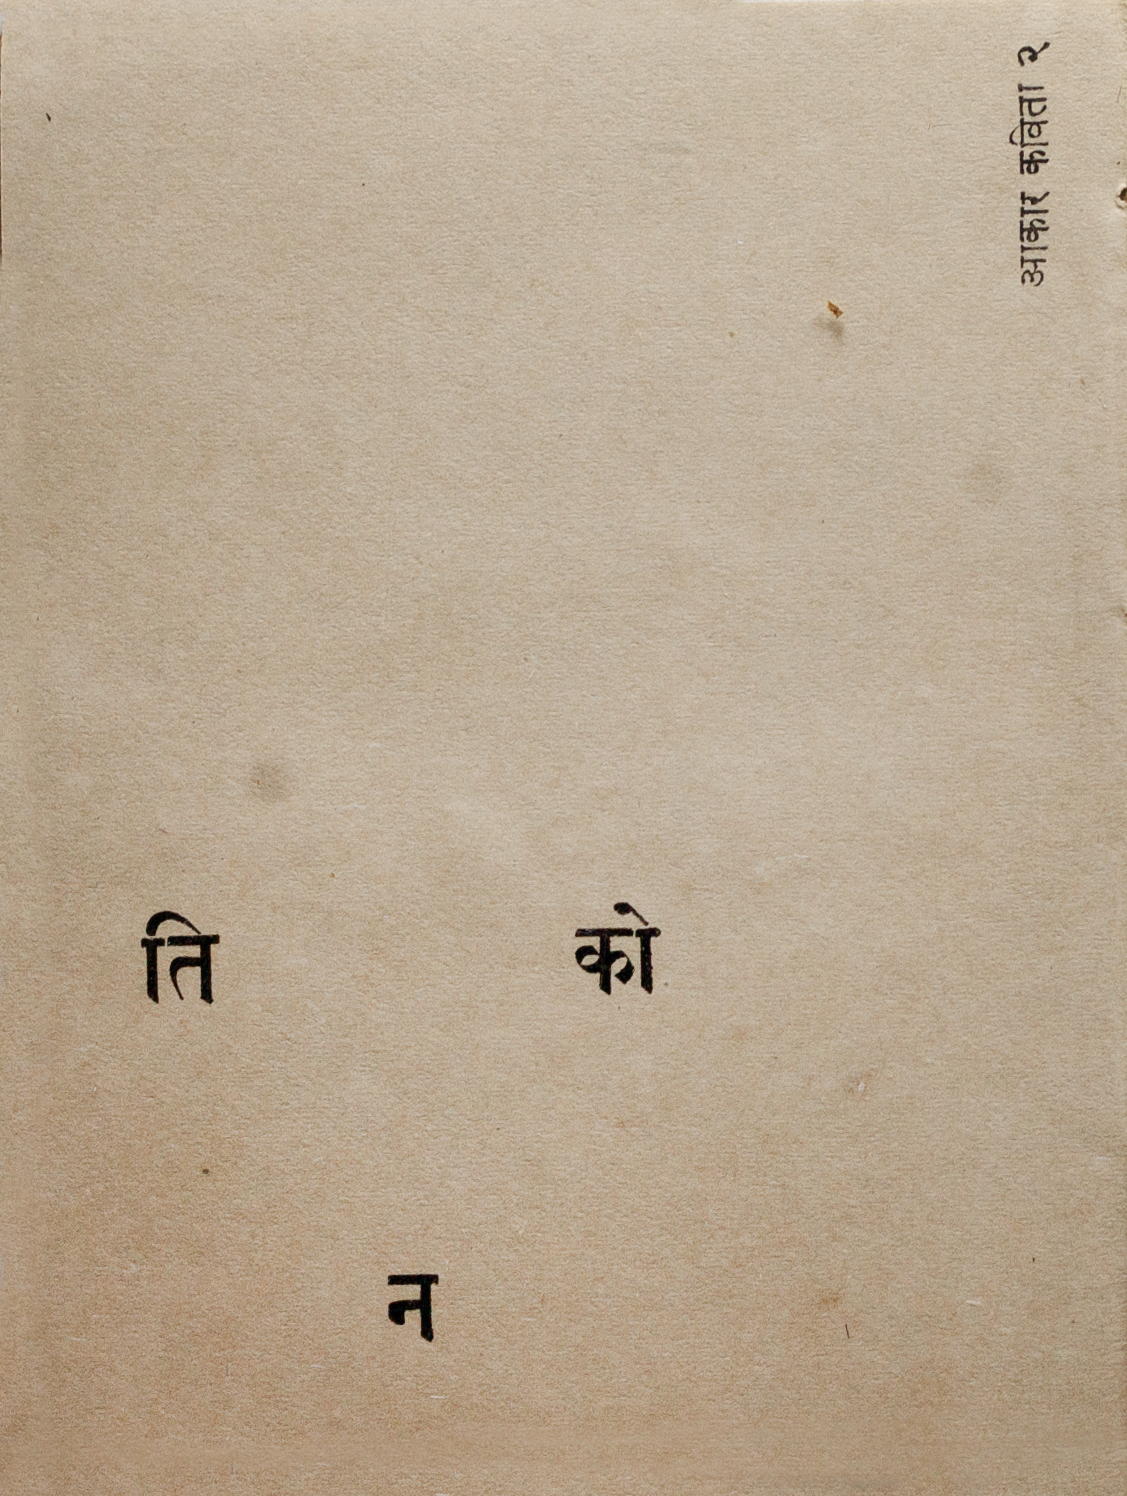 आकार कविता २(Concrete poetry No.2) in Marathi spelling out the word for triangle by R. K. Joshi. Rava No. 10, November 1972. Image courtesy Shrujana N. Shridhar.